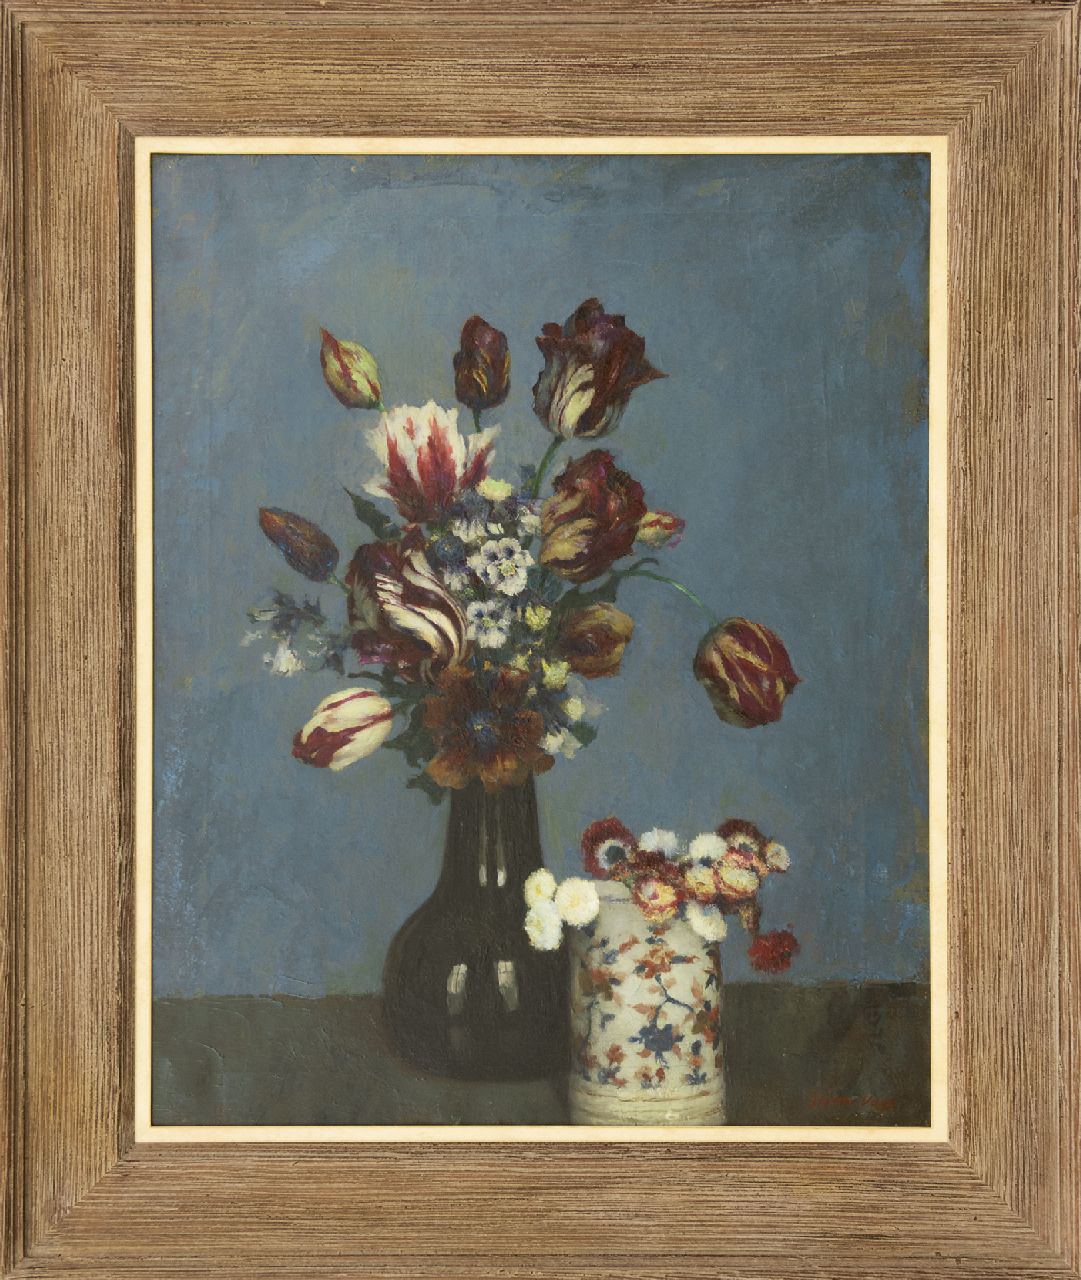 Vaes W.  | Walter Vaes | Paintings offered for sale | Still life with flowers, oil on canvas 67.9 x 54.5 cm, signed l.r.